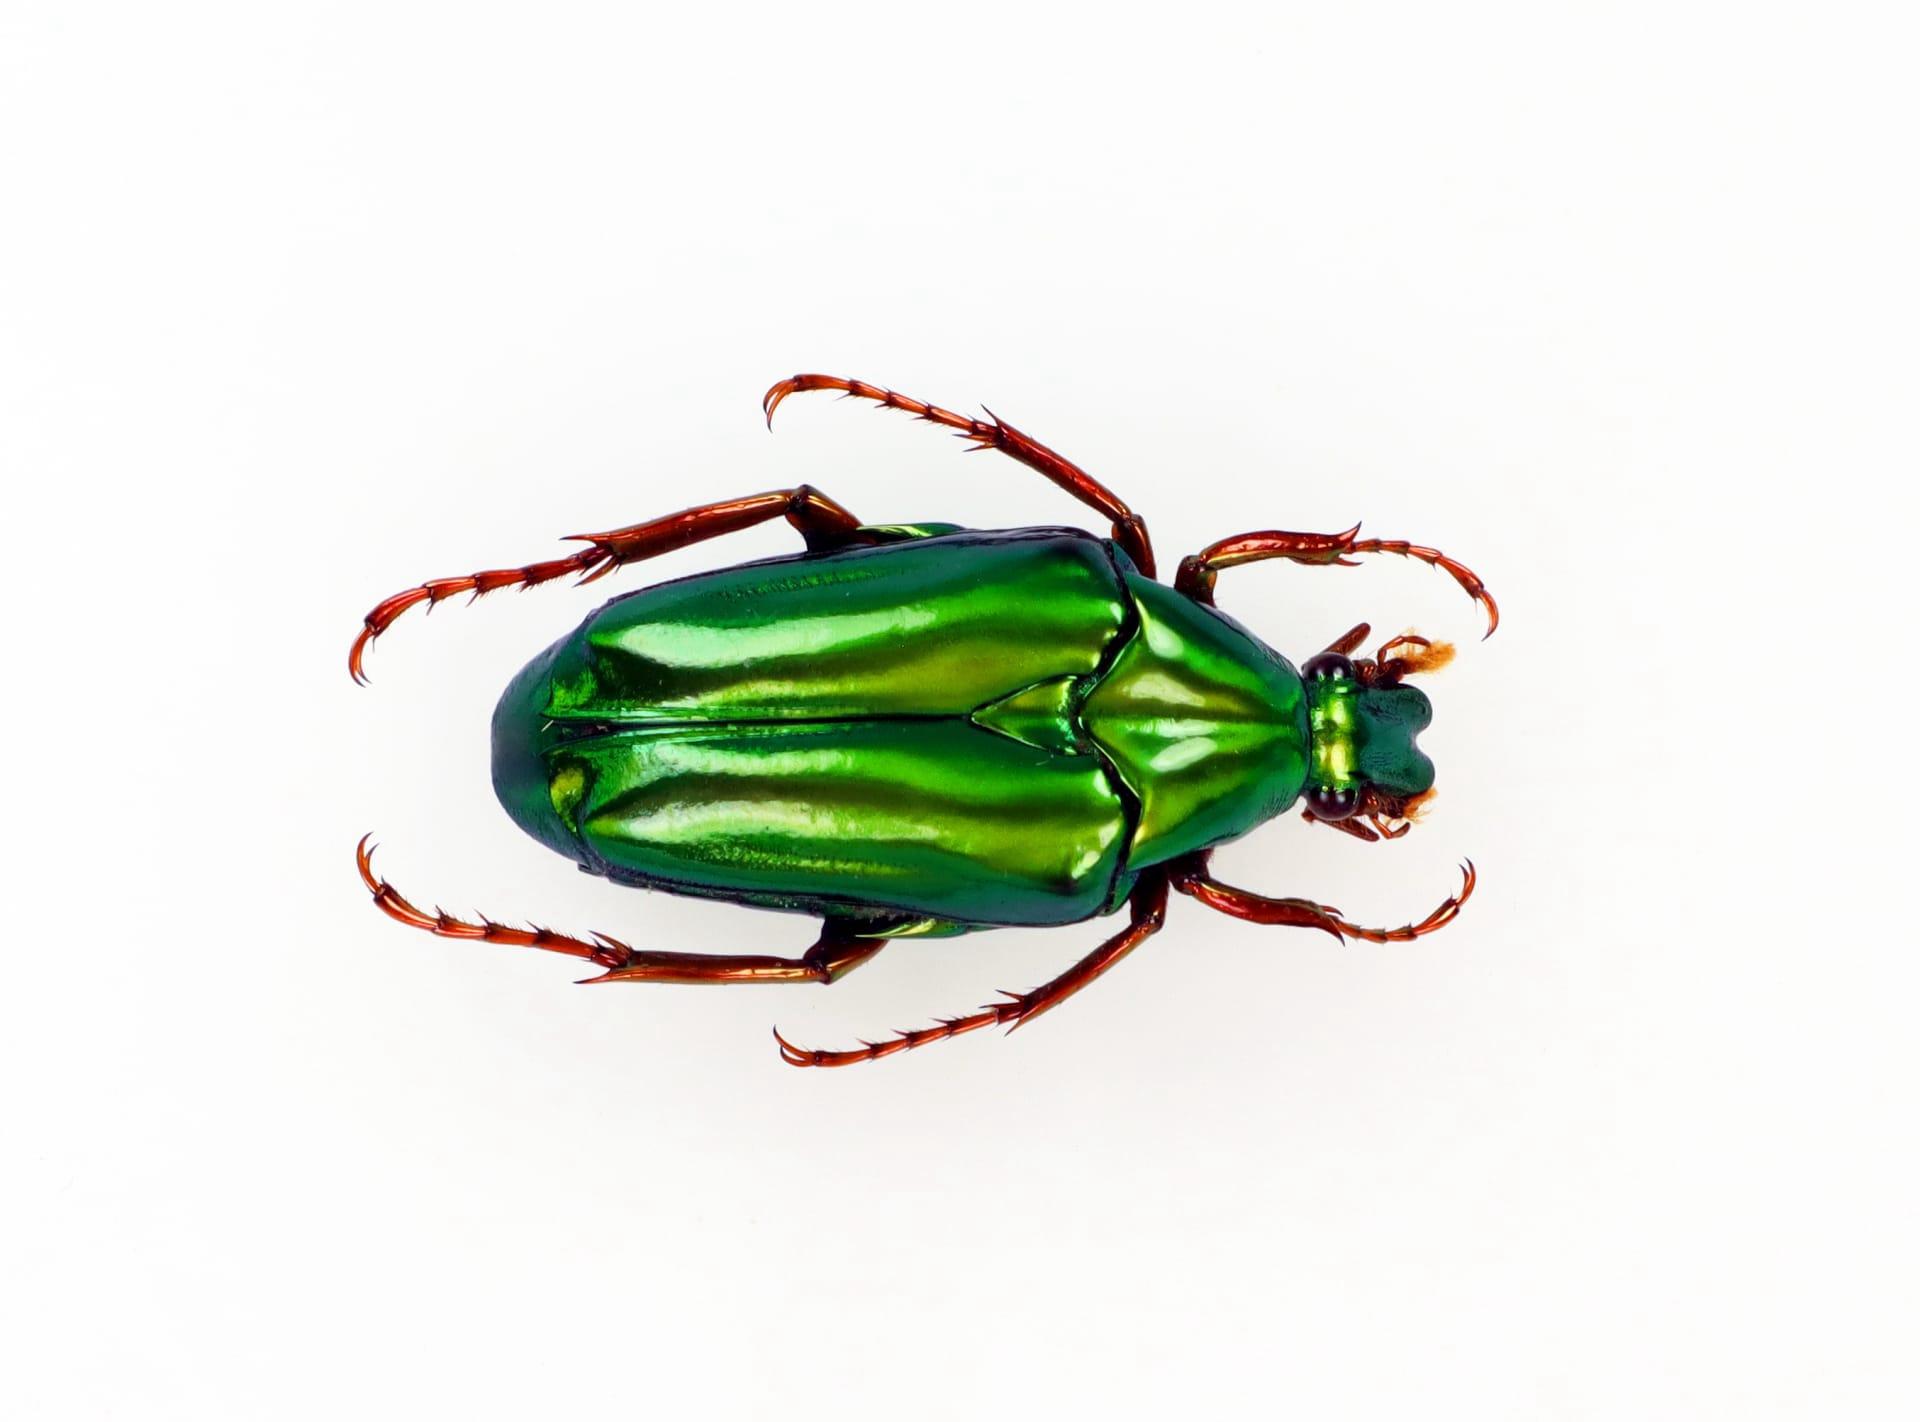 Christmas beetle pictures